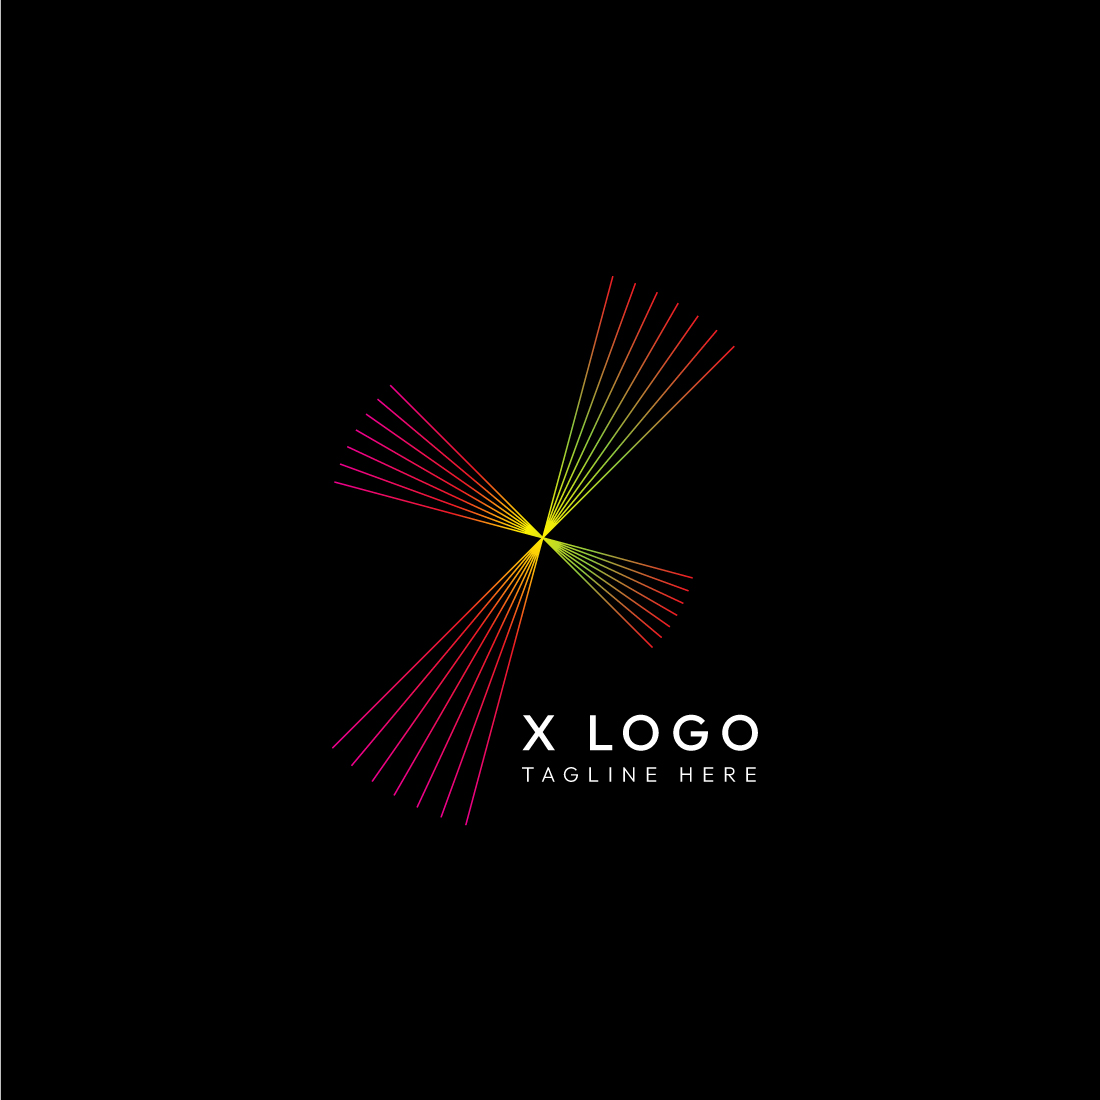 X Logo Design: Professional Logos for Every Industry cover image.